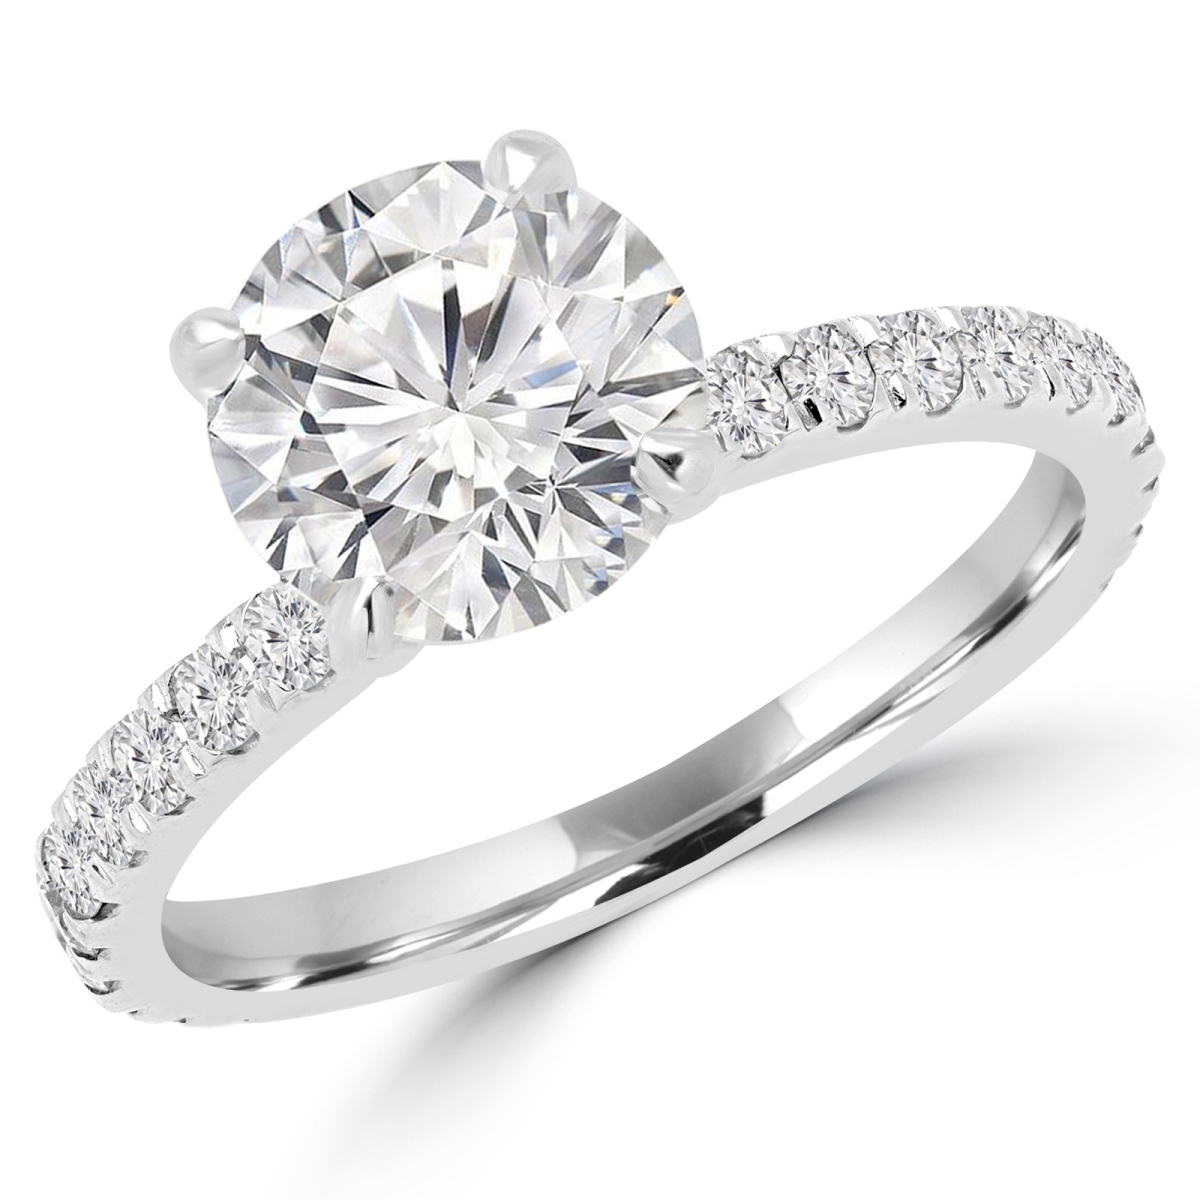 Picture of Majesty Diamonds MD180265-P 1.14 CTW Round Diamond Solitaire with Accents Engagement Ring in 14K White Gold